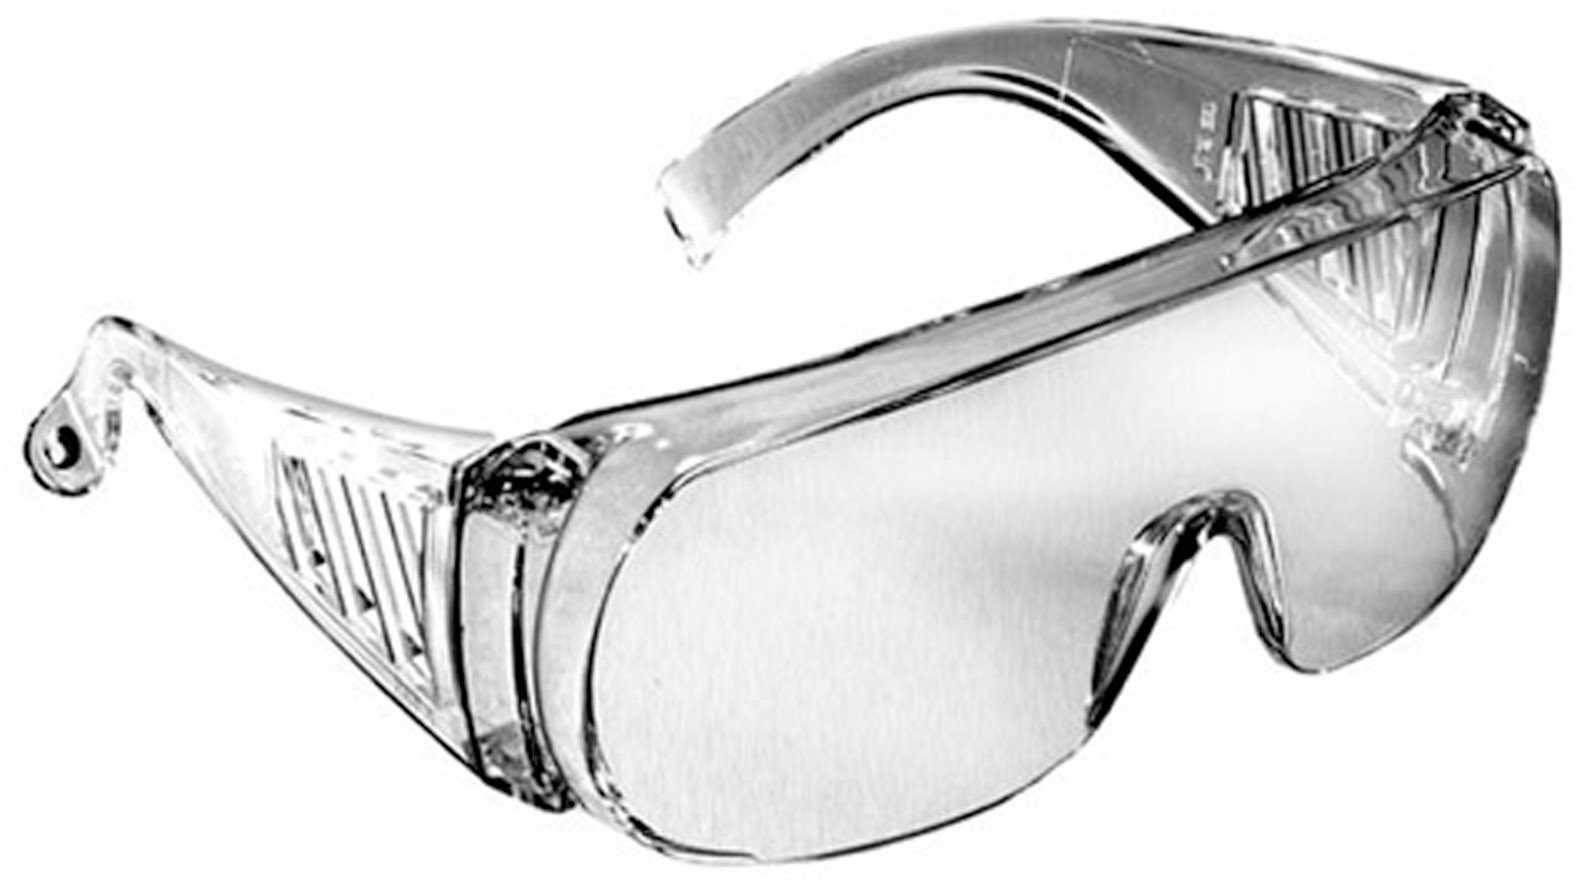 COveralls Shooting Glasses Clear Lens Designed To Be Worn Over Prescription - Side Ventilation Ports For Better